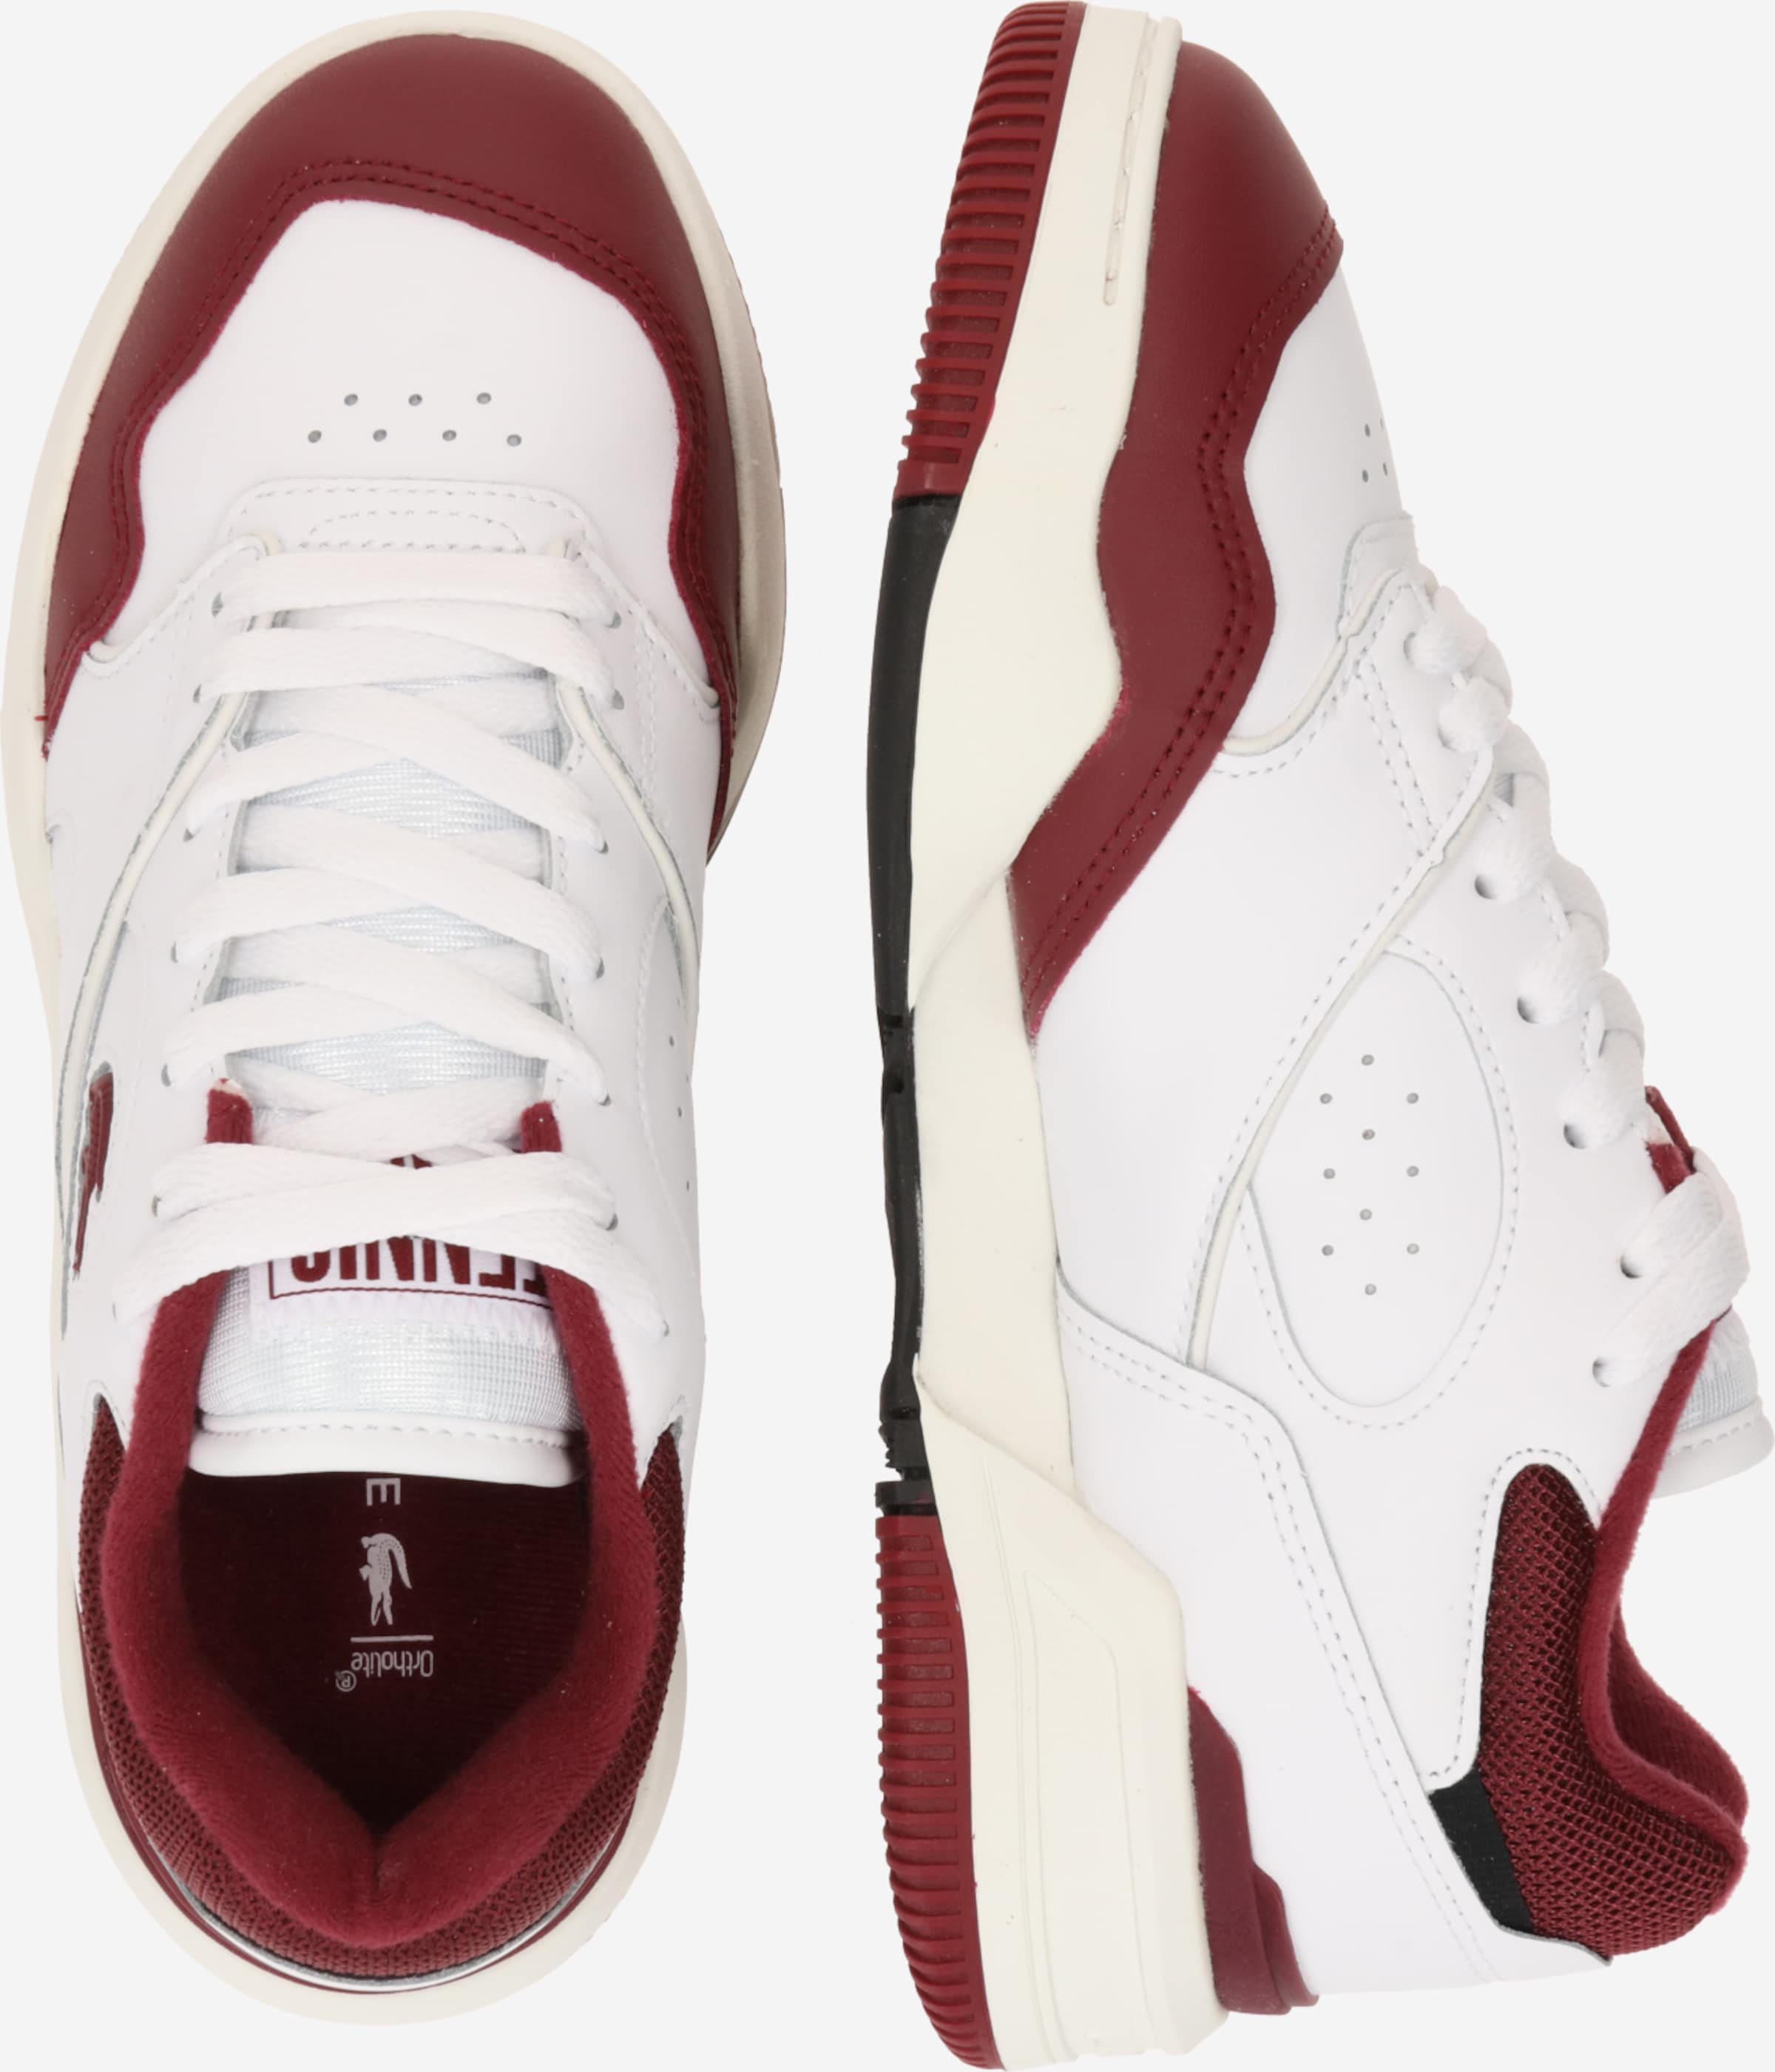 LACOSTE Sneaker low 'LINESHOT' i | ABOUT